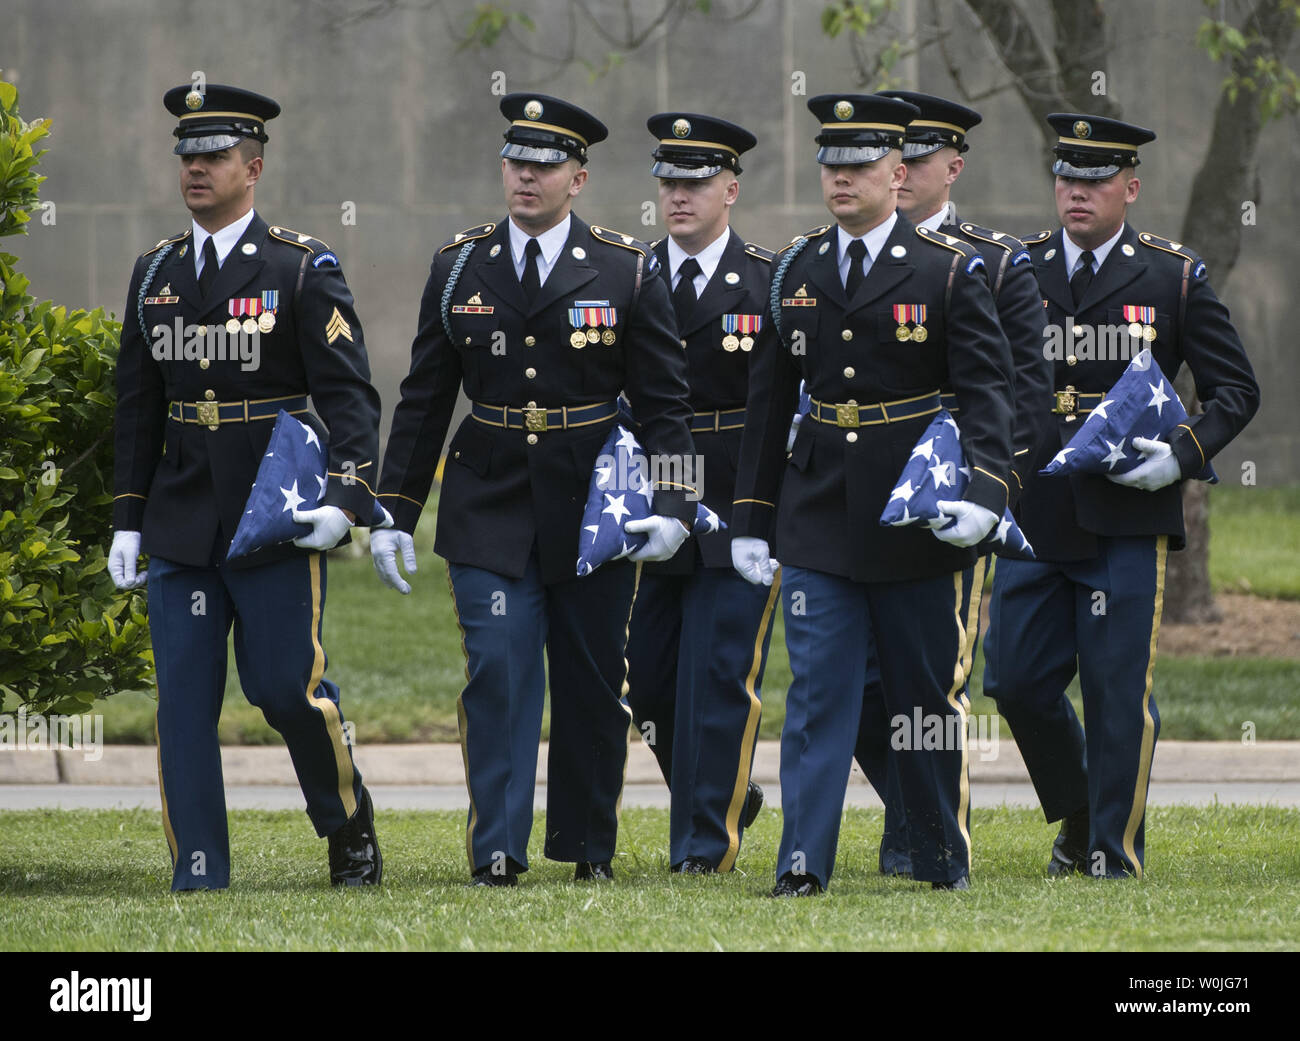 Members of an Honor Guard with the Army's 3rd Infantry Regiment (The Old Guard) carry flags during Army Staff Sergeant Mark De Alencar's funeral at Arlington National Cemetery in Arlington, Virginia on May 10, 2017. Alencar was killed in combat operations in Afghanistan. Photo by Kevin Dietsch/UPI Stock Photo